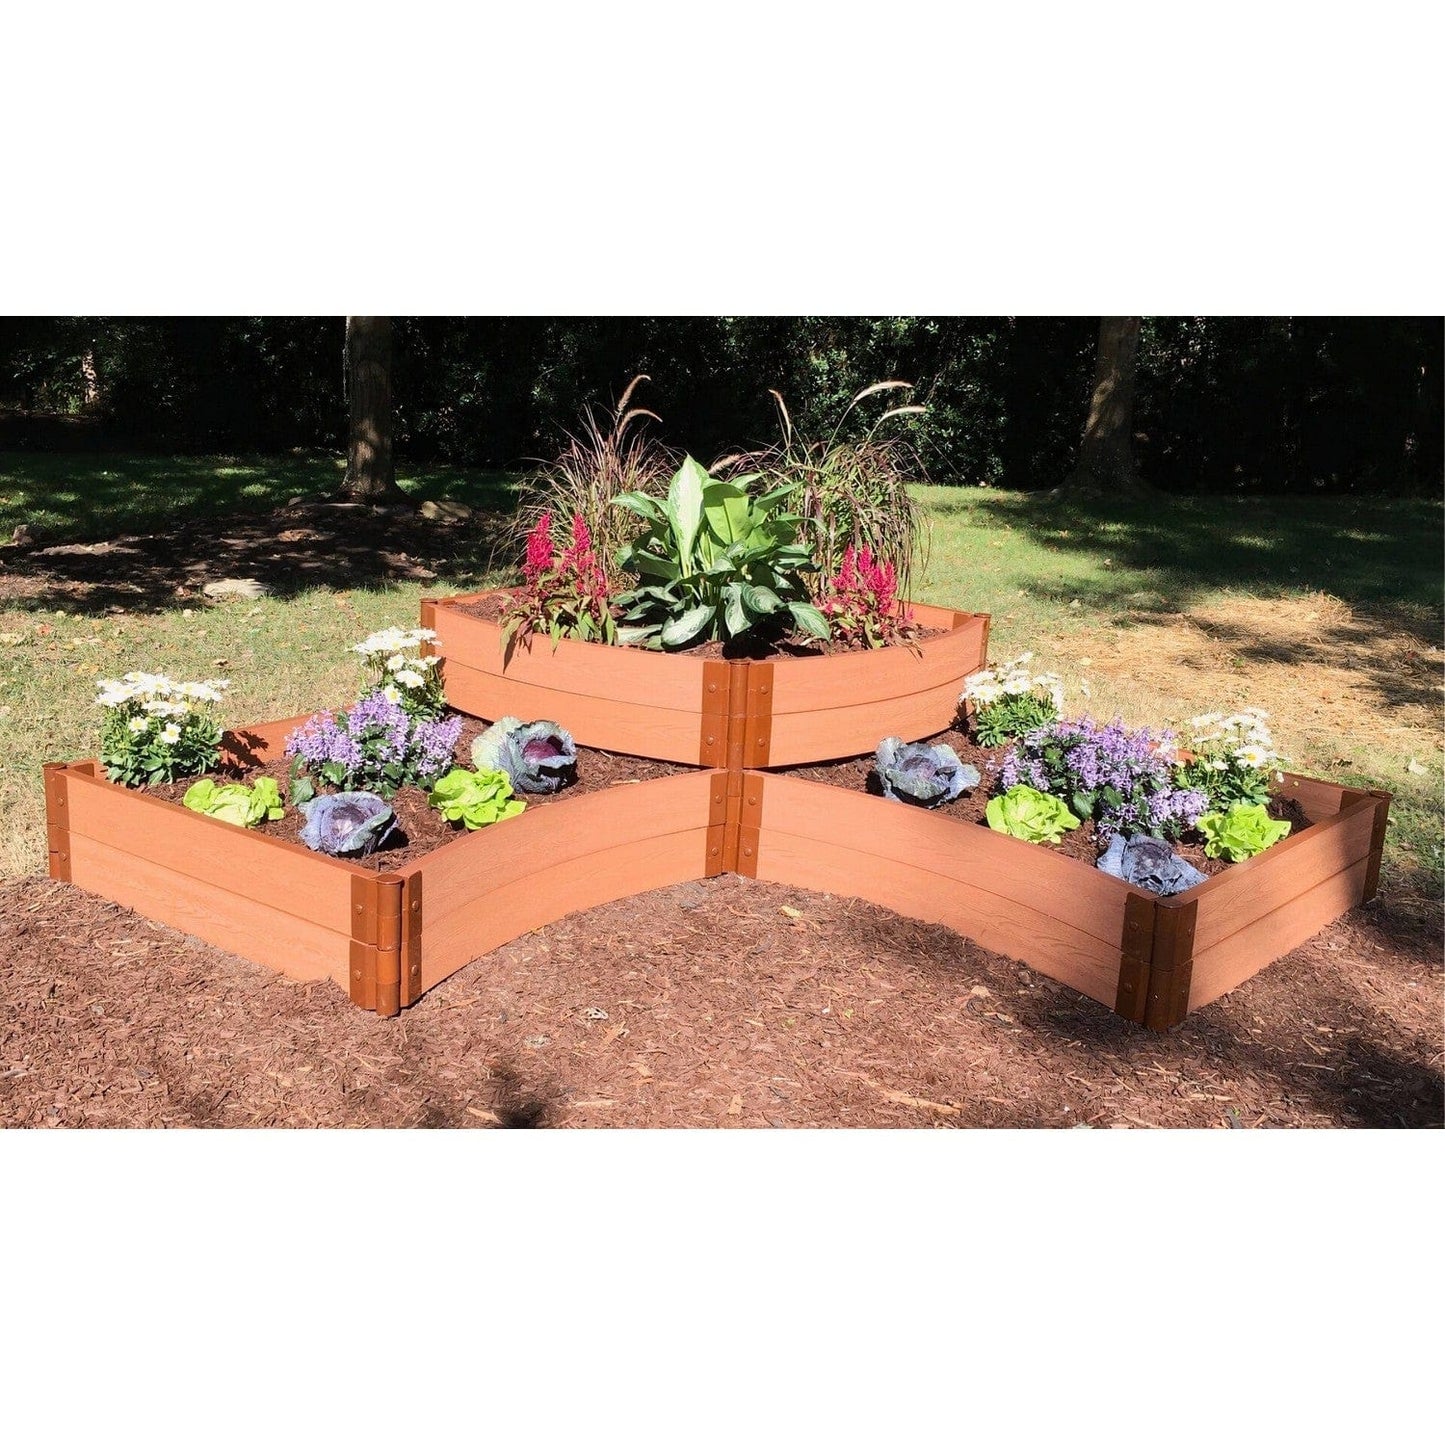 Frame It All Gardening Accessories Frame It All | Tool-Free Teardrop Curved Corner Raised Garden Bed (2-Tier) 8' X 8' X 16.5" - Uptown Brown - 1" Profile 800003008